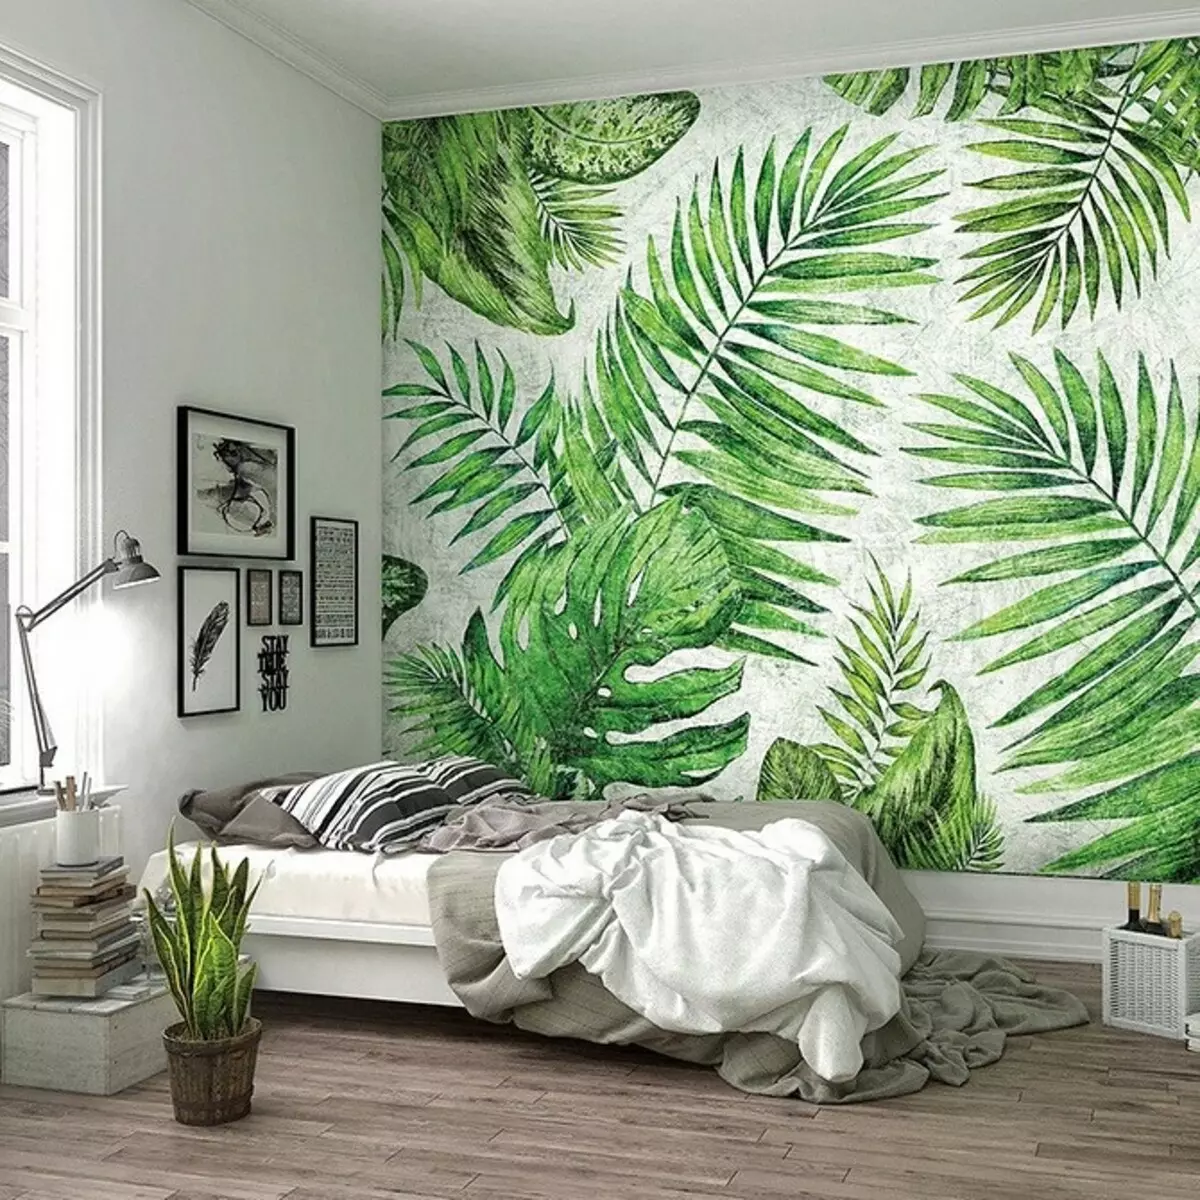 Bedroom Wallpaper Design: Fashion Trends 2020 and Selling Tips 6477_118